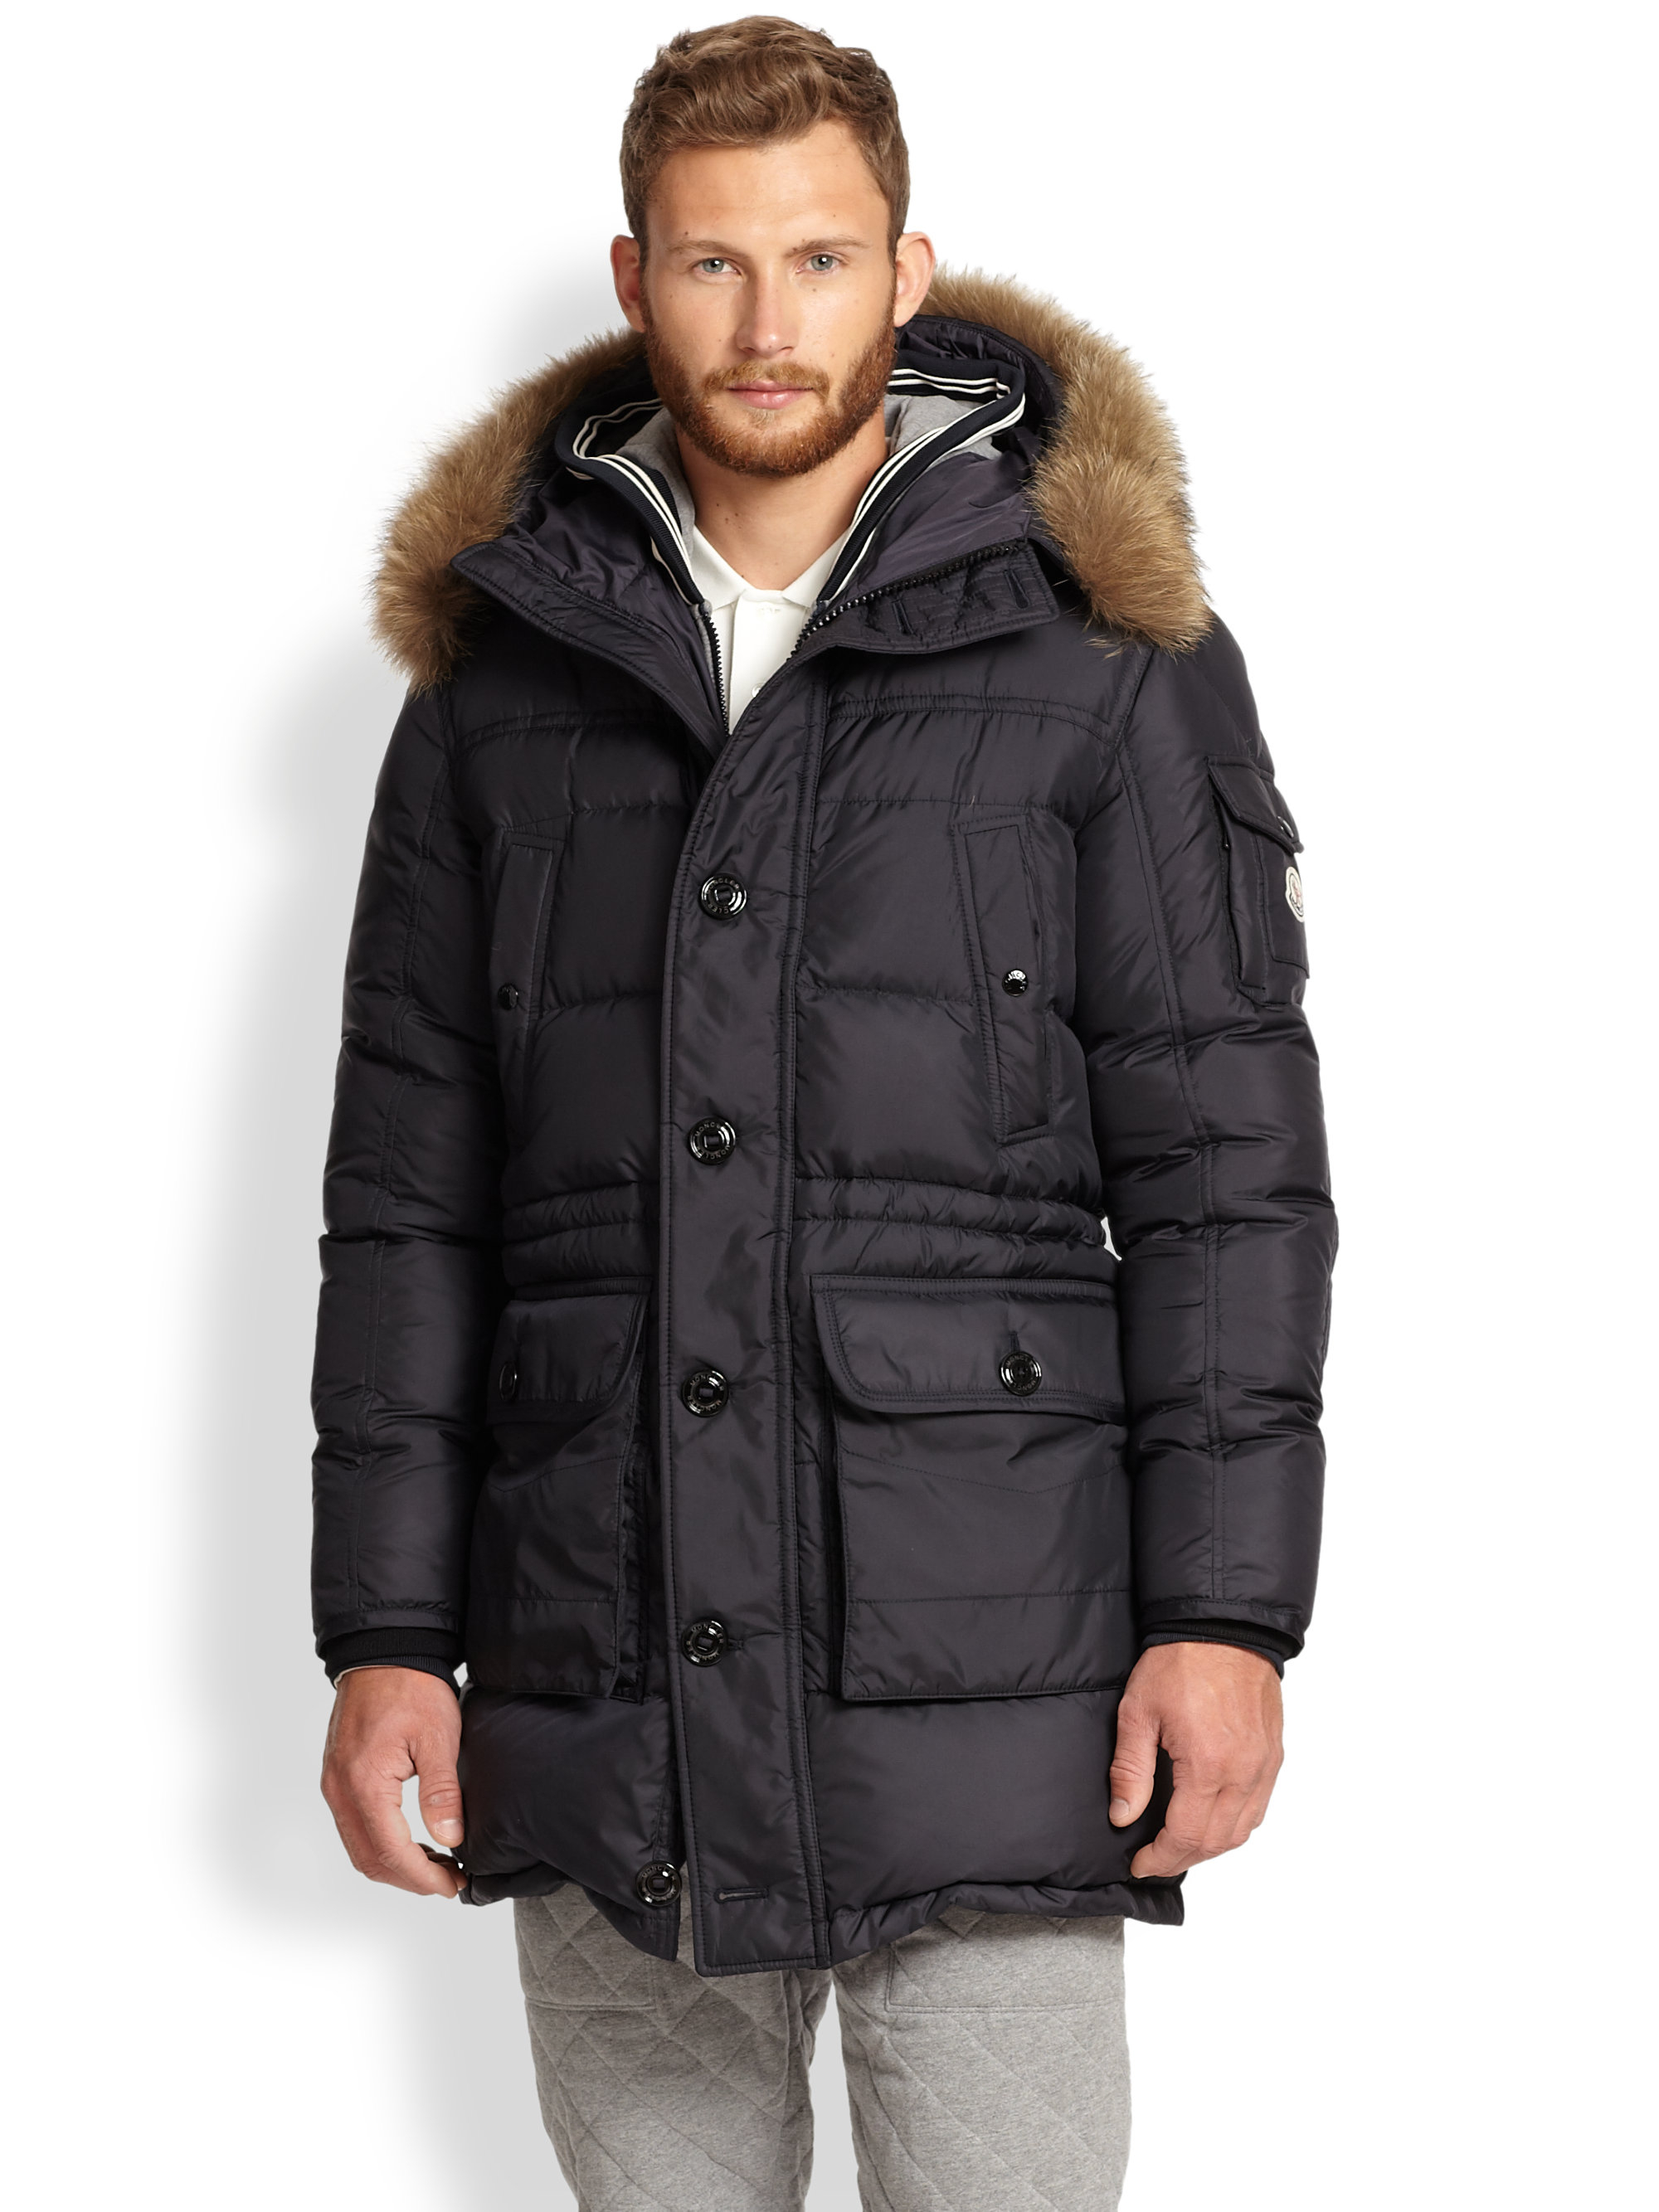 moncler affton coat men down black | West of Rayleigh